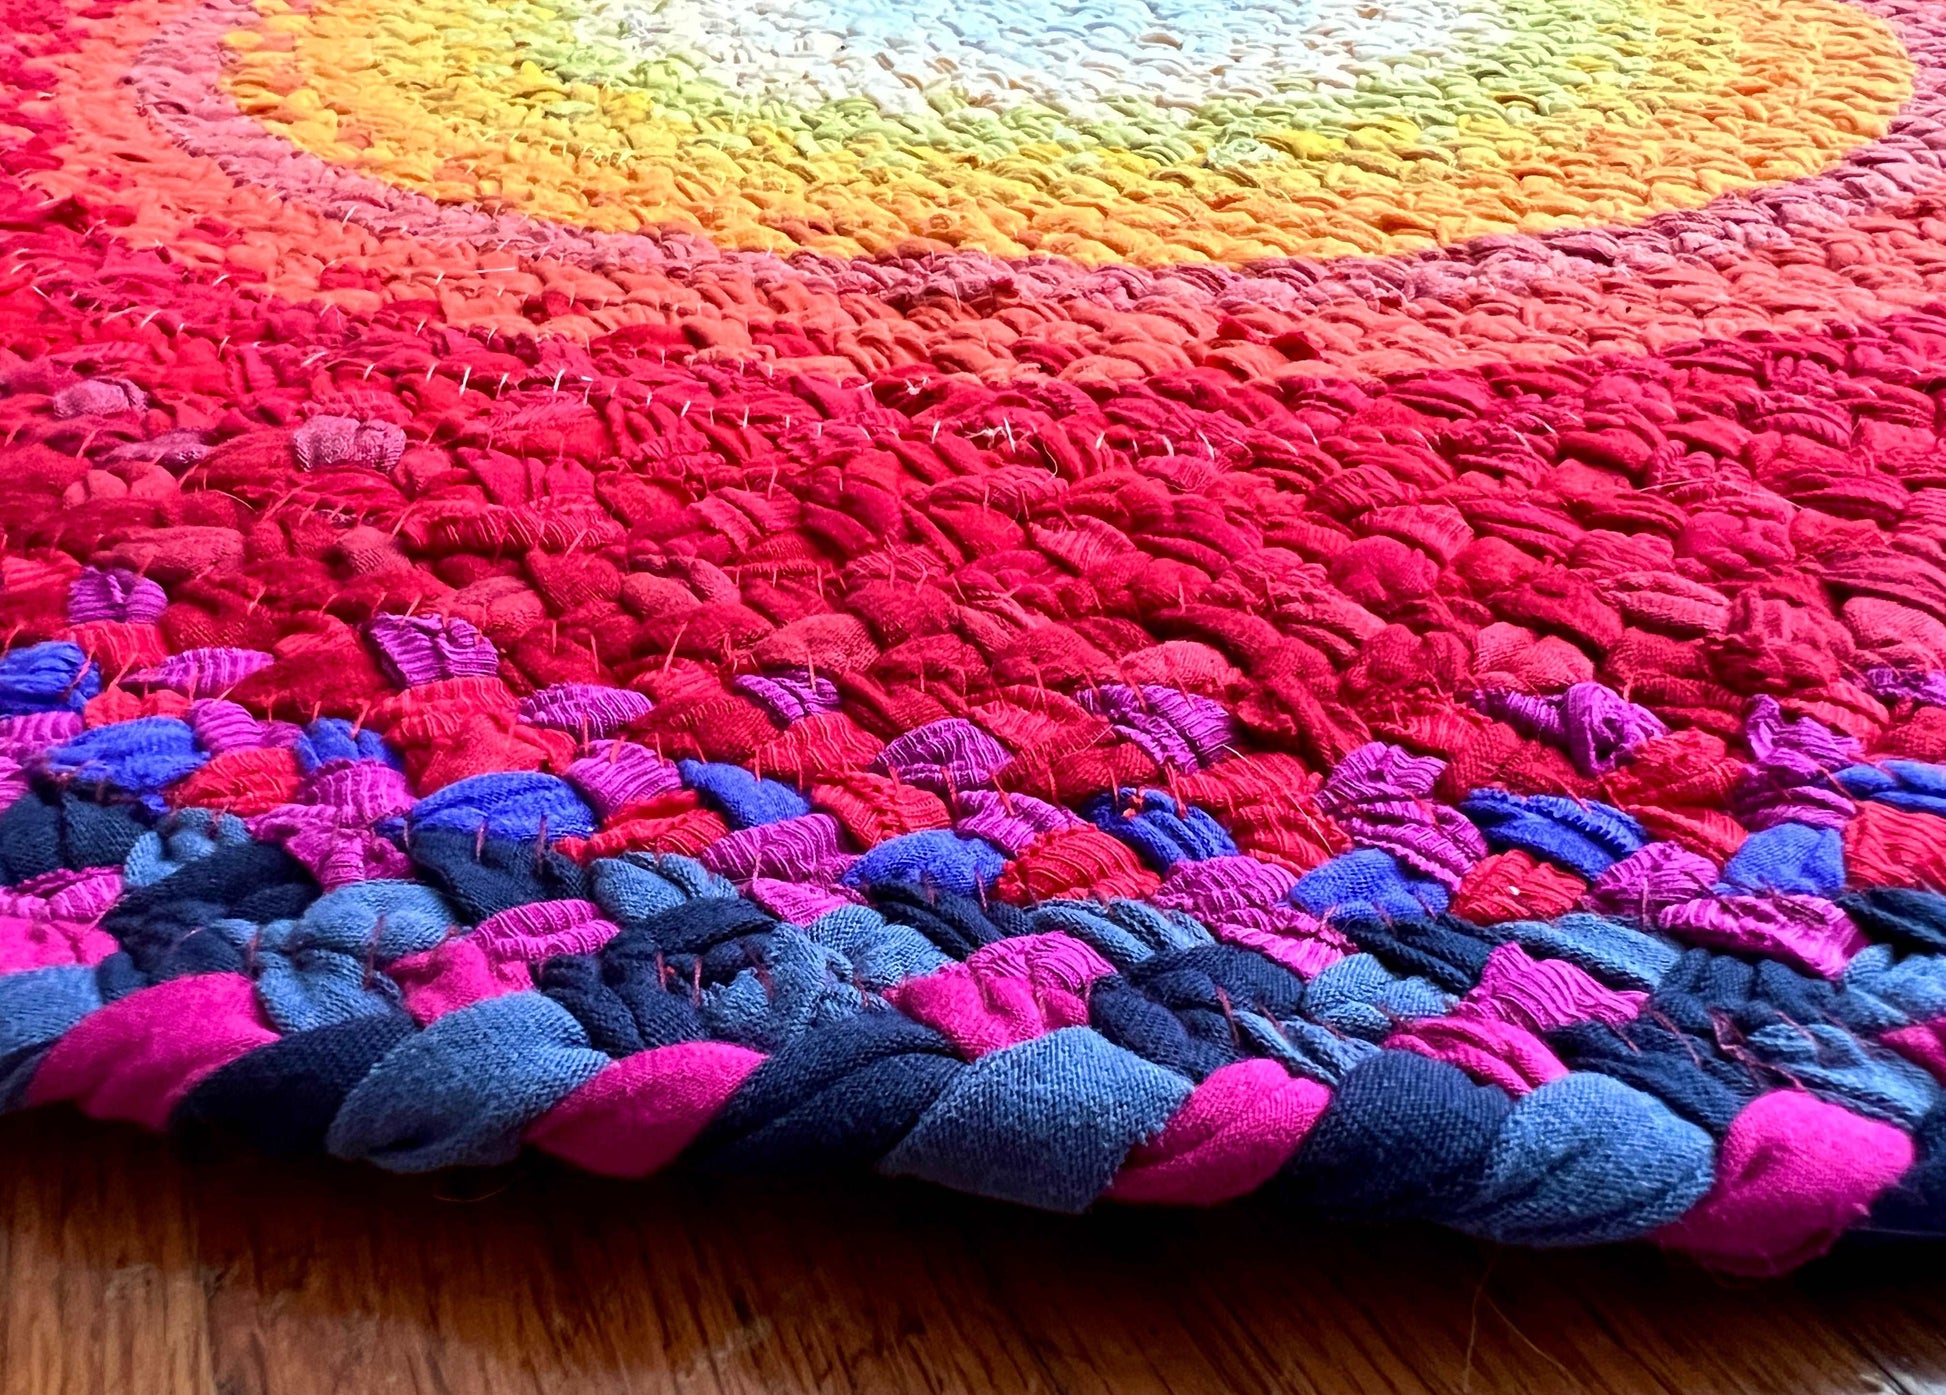 closeup side view of the underside of the rug, showing colorful stitches